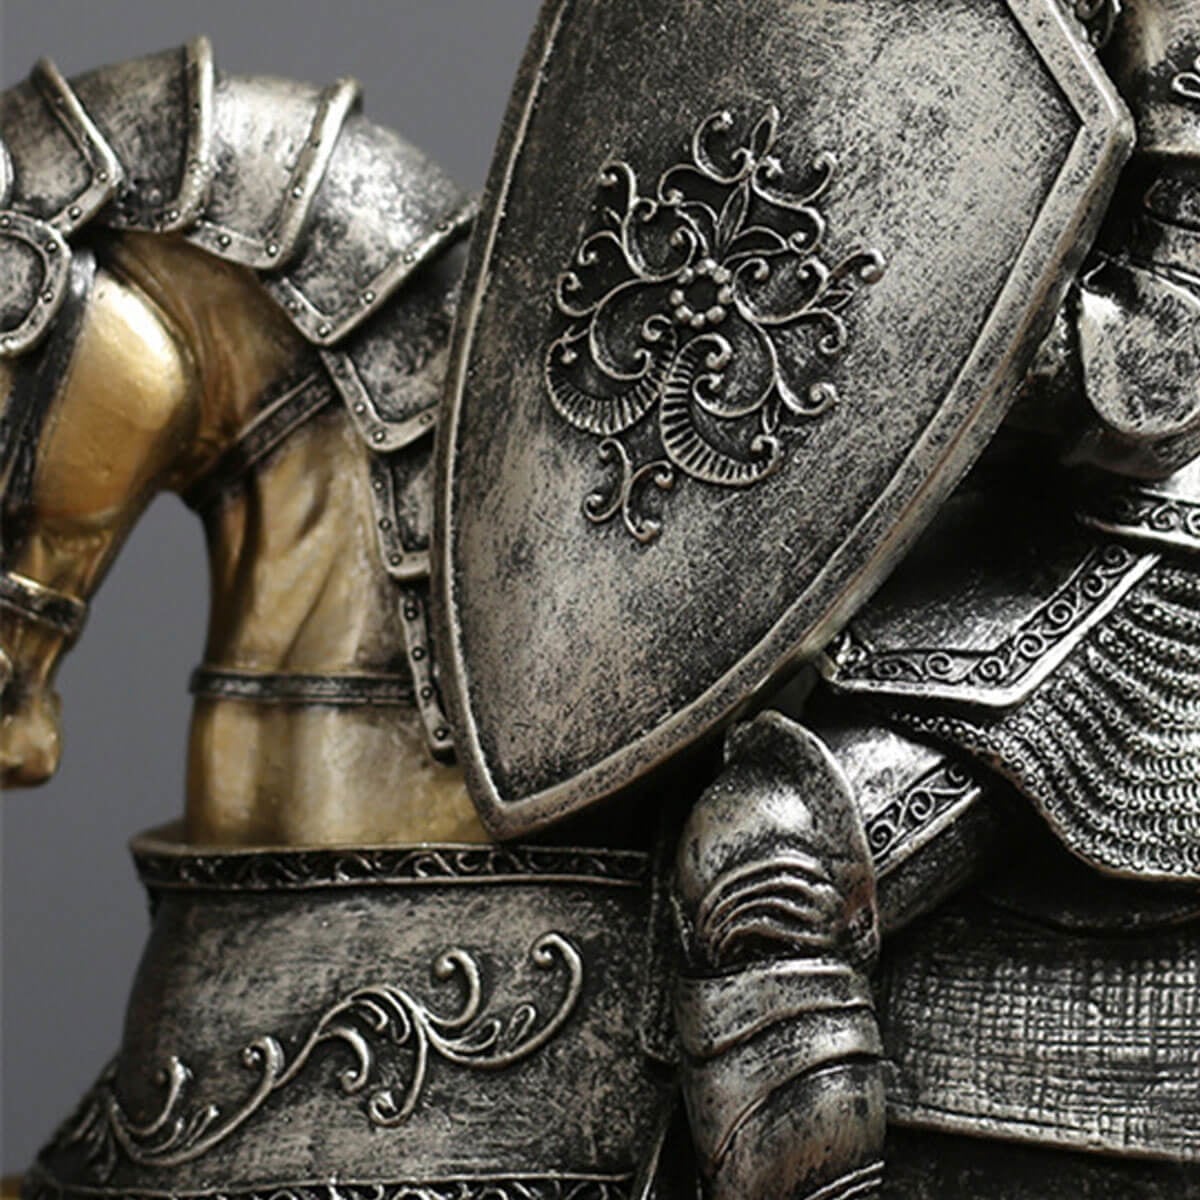 The Victory Warrior Armor Knight Sculpture